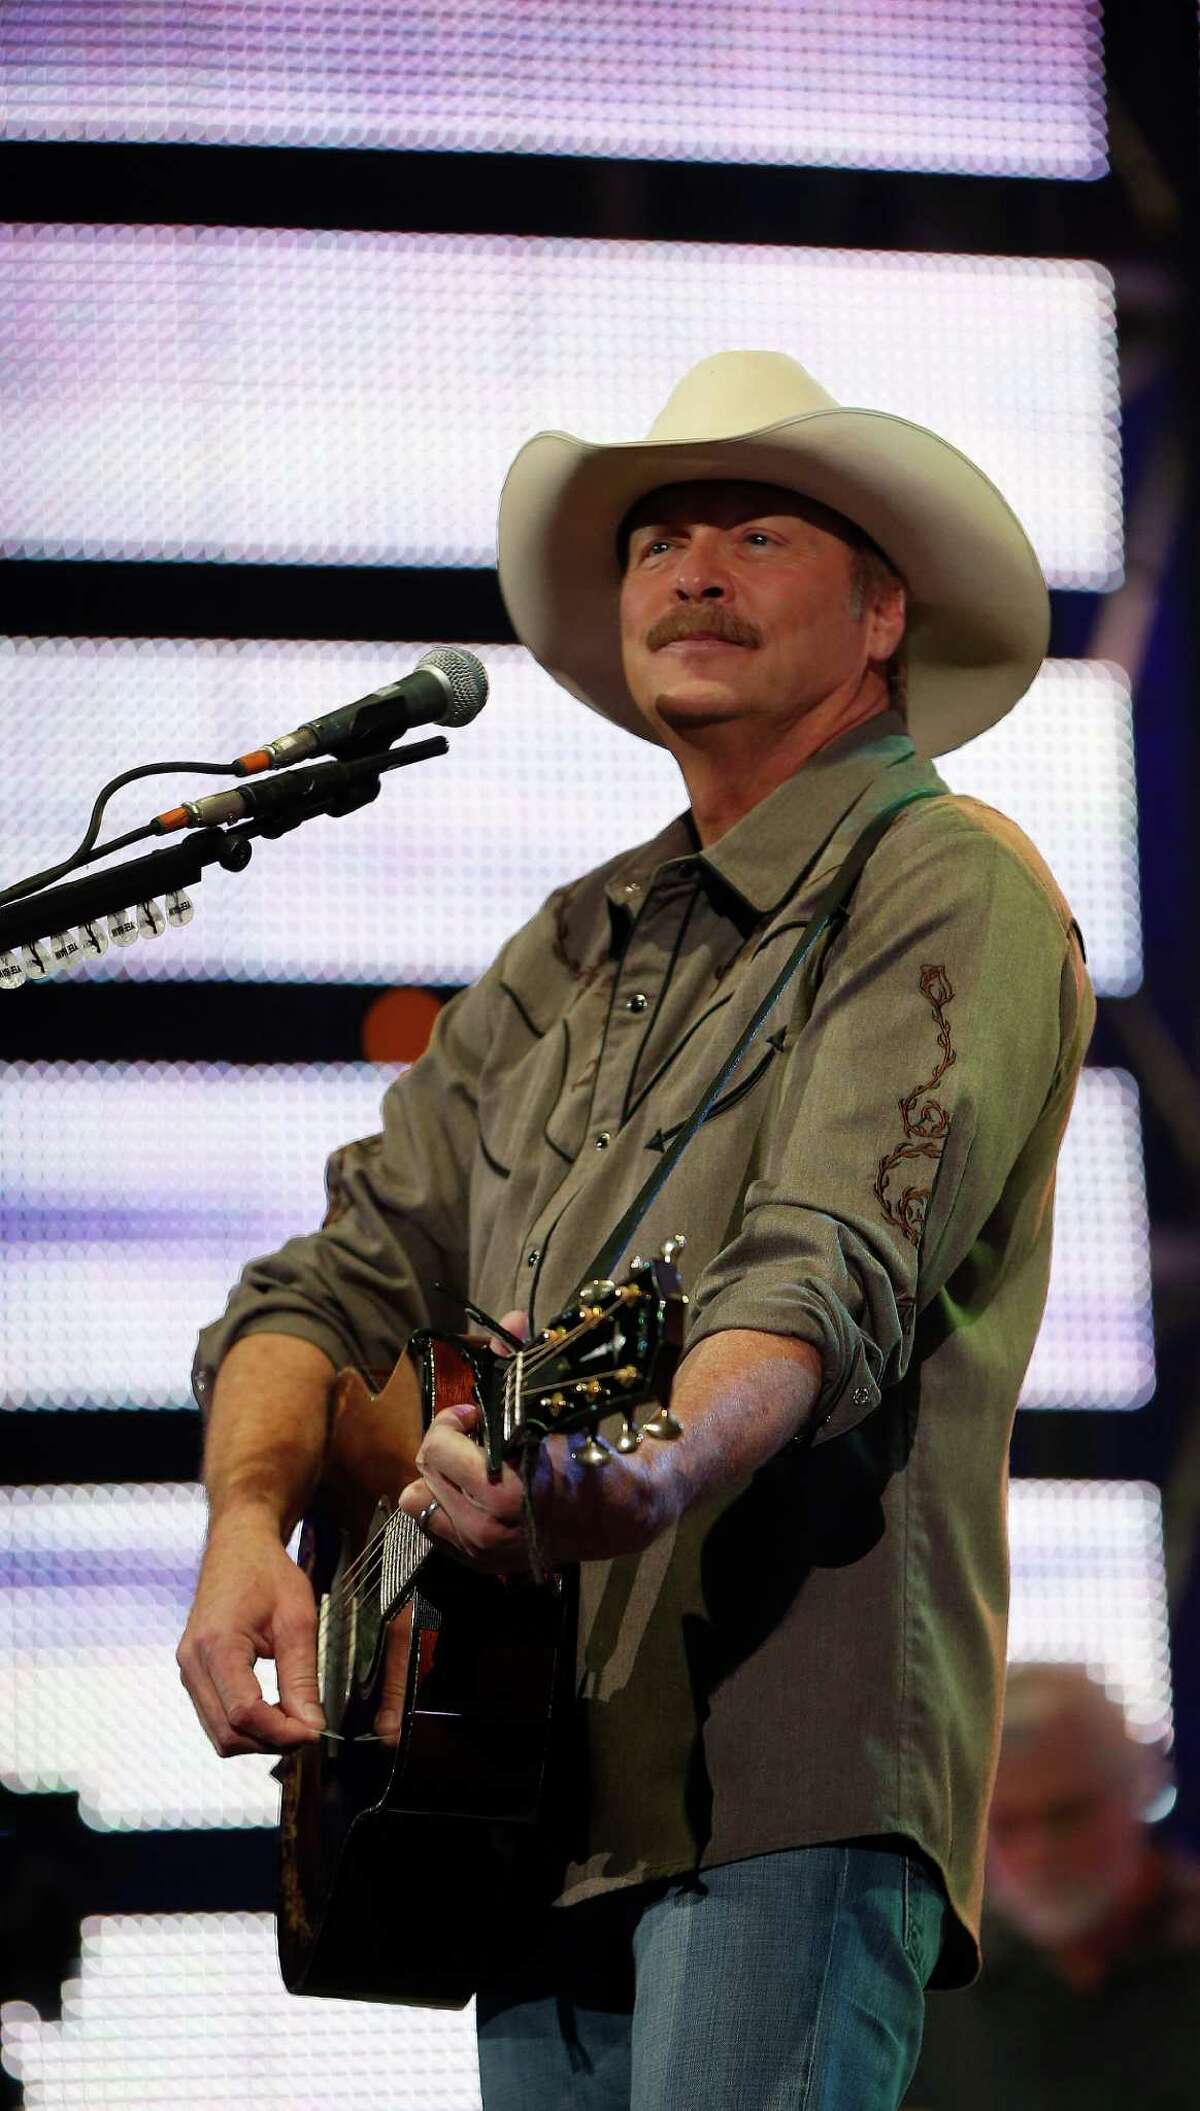 It's not the first rodeo for the charming Alan Jackson